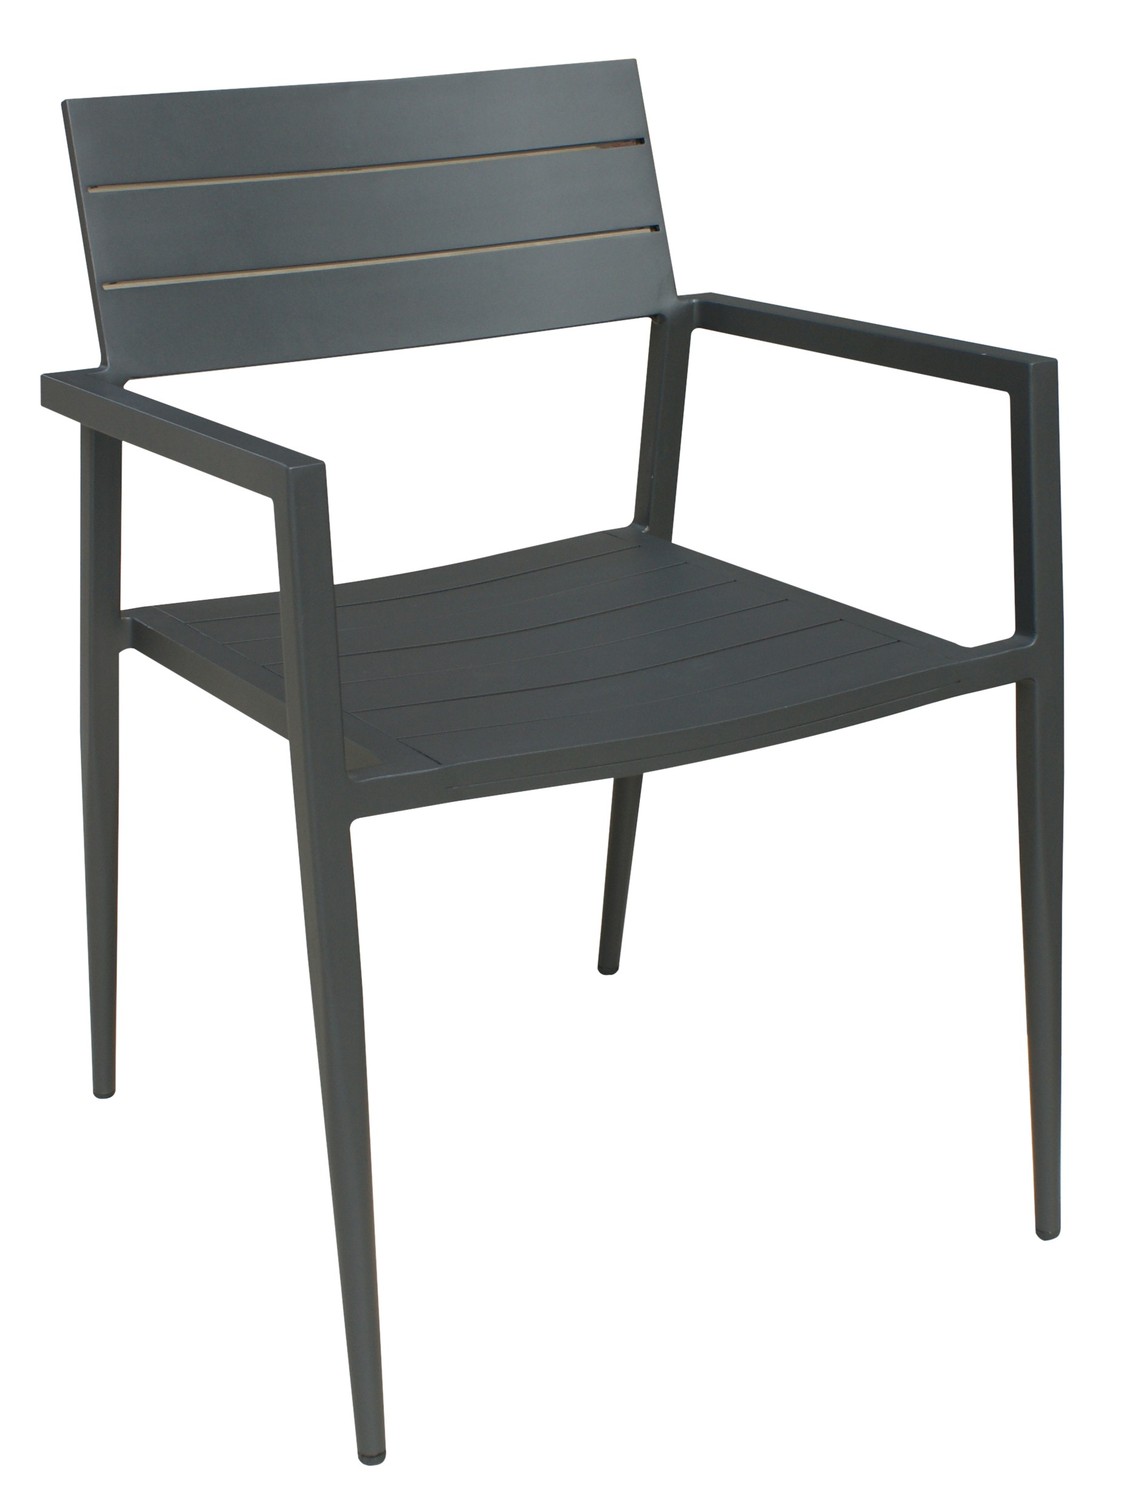 24" X 24" X 31" Dark Grey Stainless Steel Dining Armed Chair